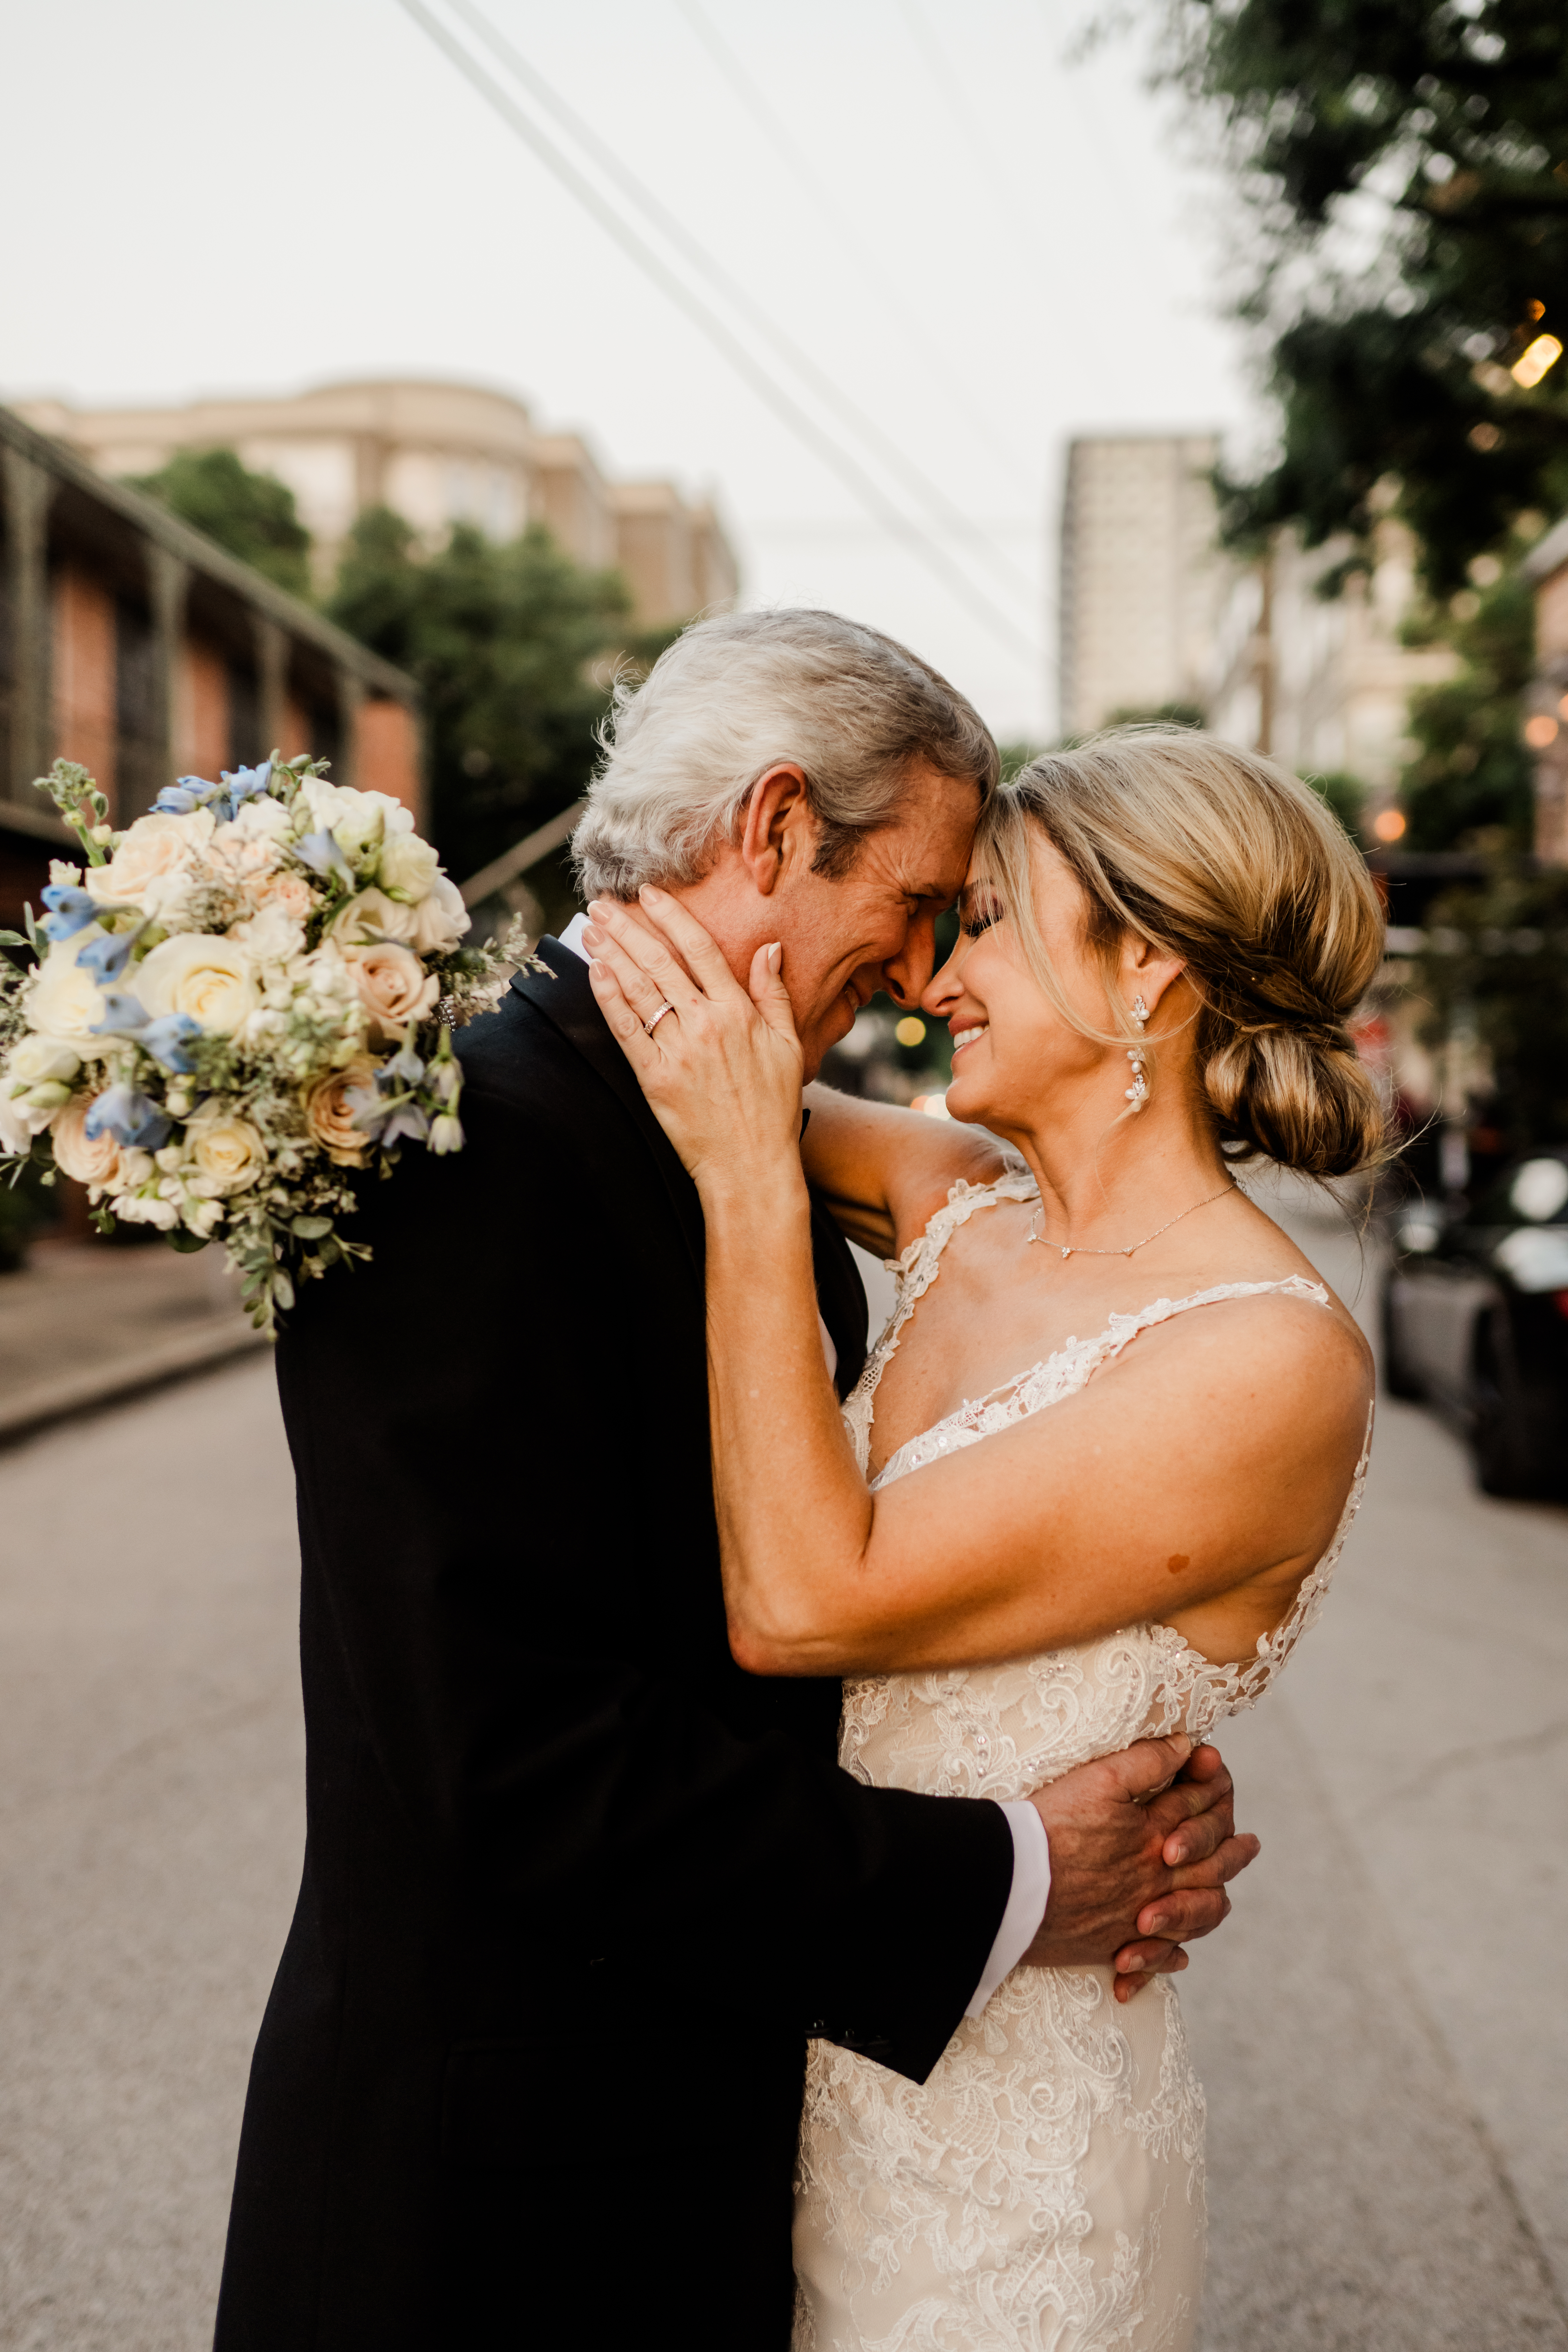 Karen and Rusty's Wedding in Downtown Houston, Texas with Rachel Driskell Photography